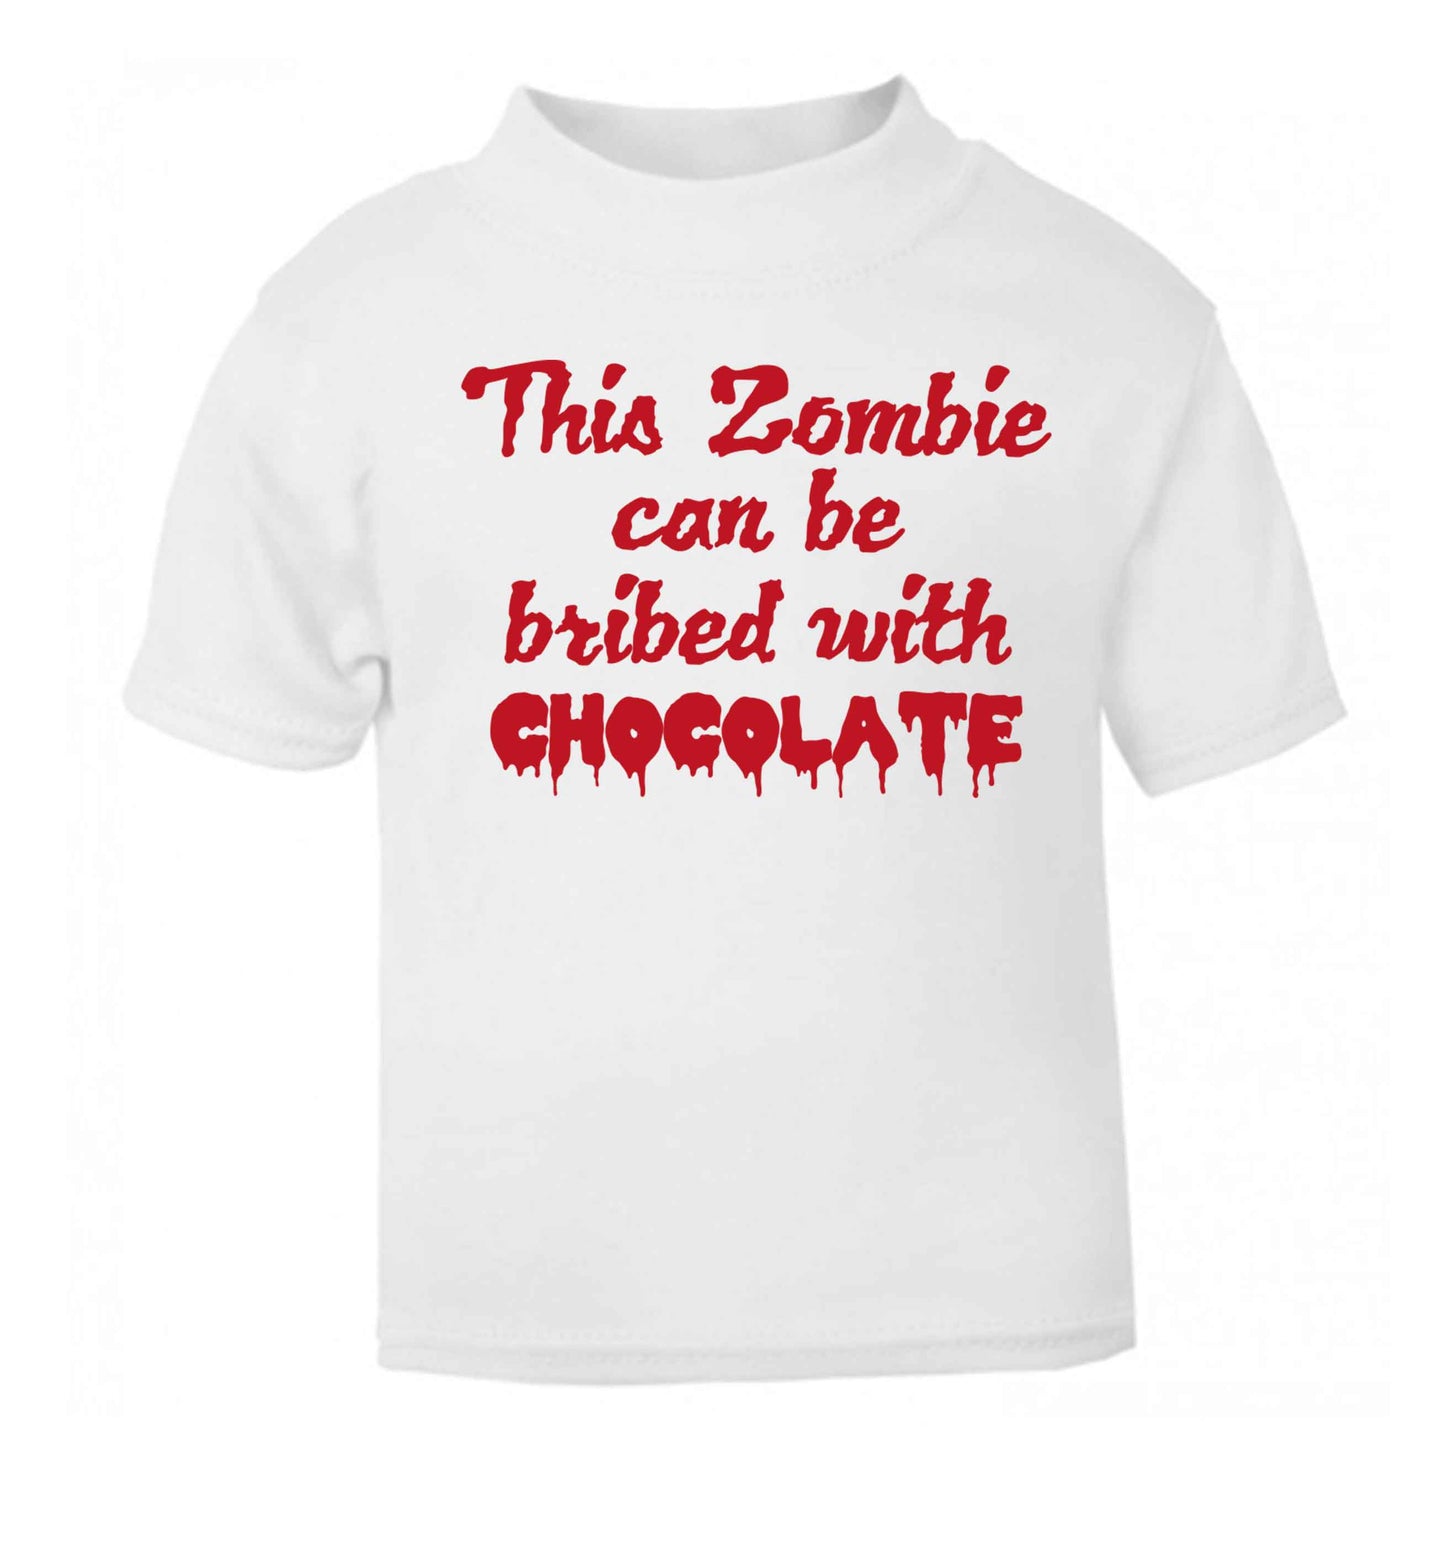 This zombie can be bribed with chocolate white baby toddler Tshirt 2 Years